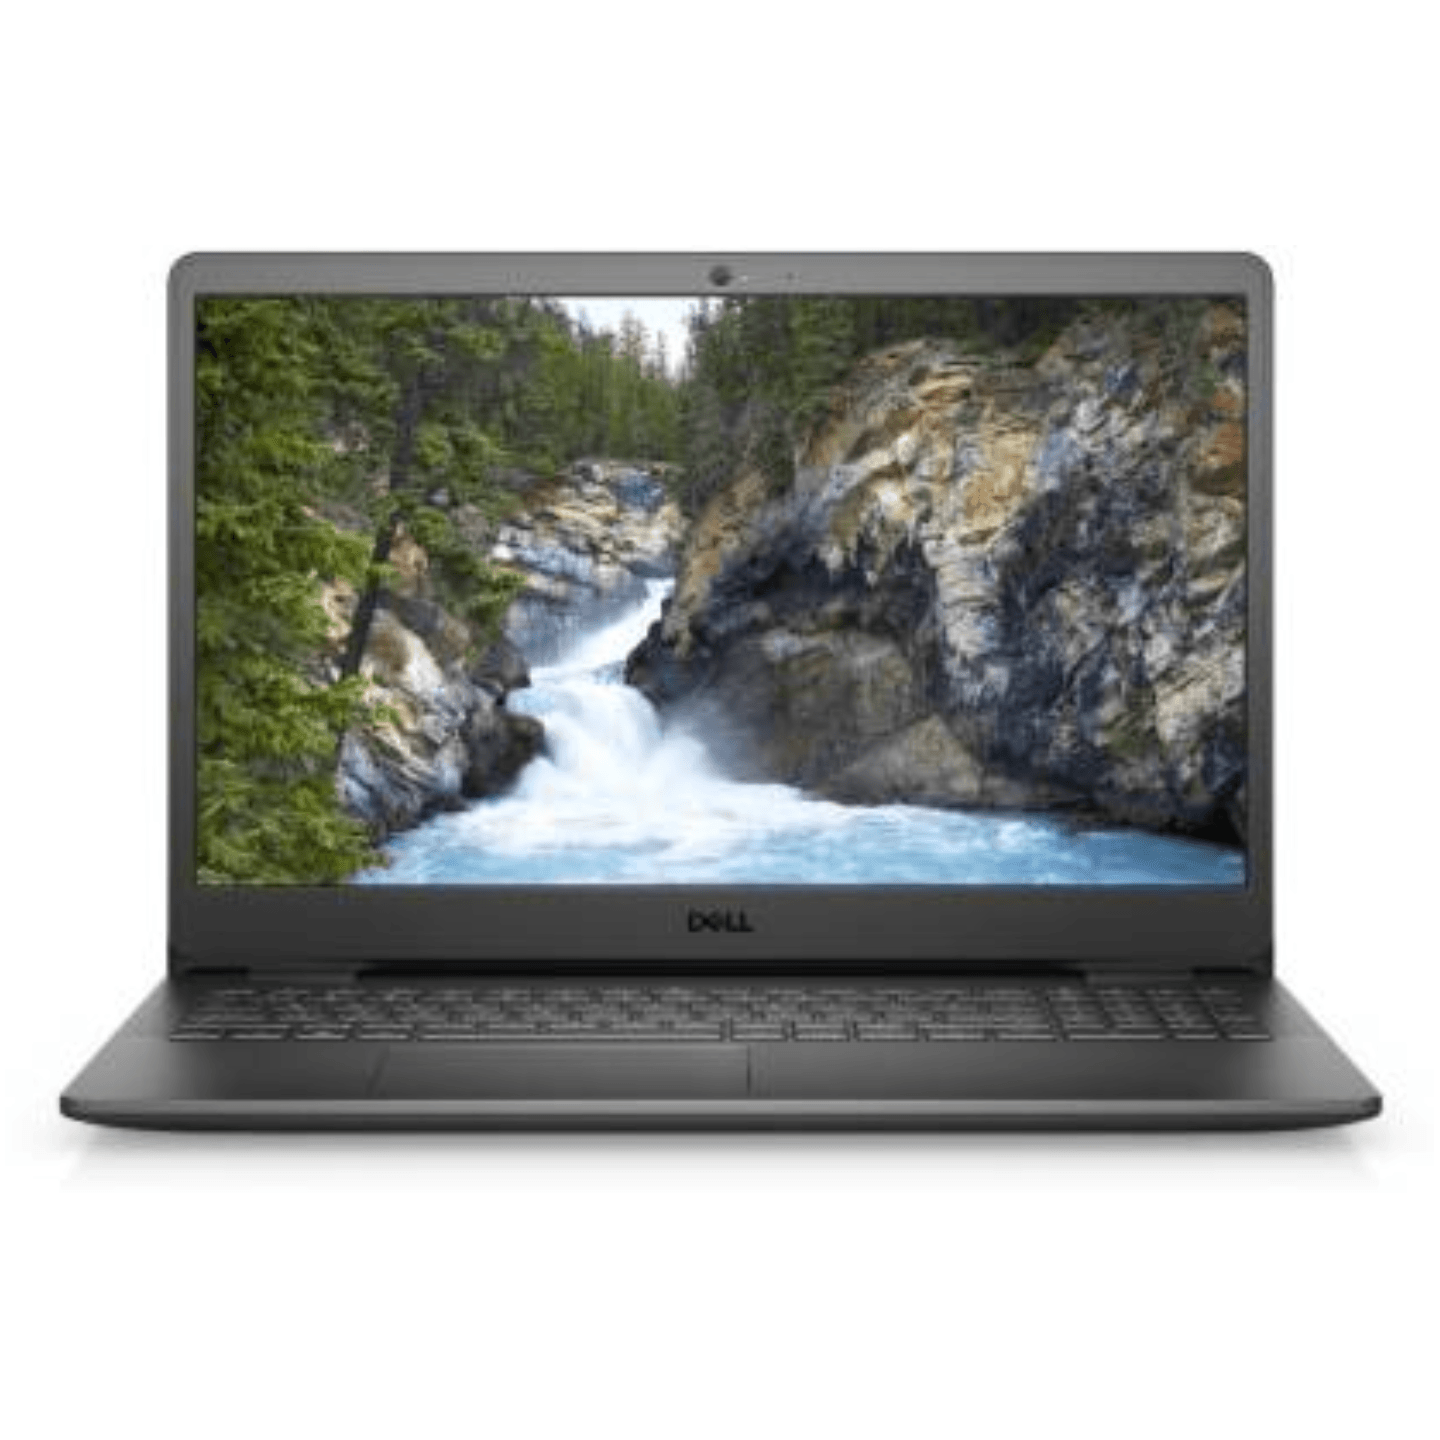 DELL Inspiron 3501 Core i5 11th Gen - (8 GB/1 TB HDD/256 GB SSD/Windows 10 Home) Inspiron 3501 Thin and Light Laptop  (15.6 inch, Black, 1.83 kg, With MS Office)